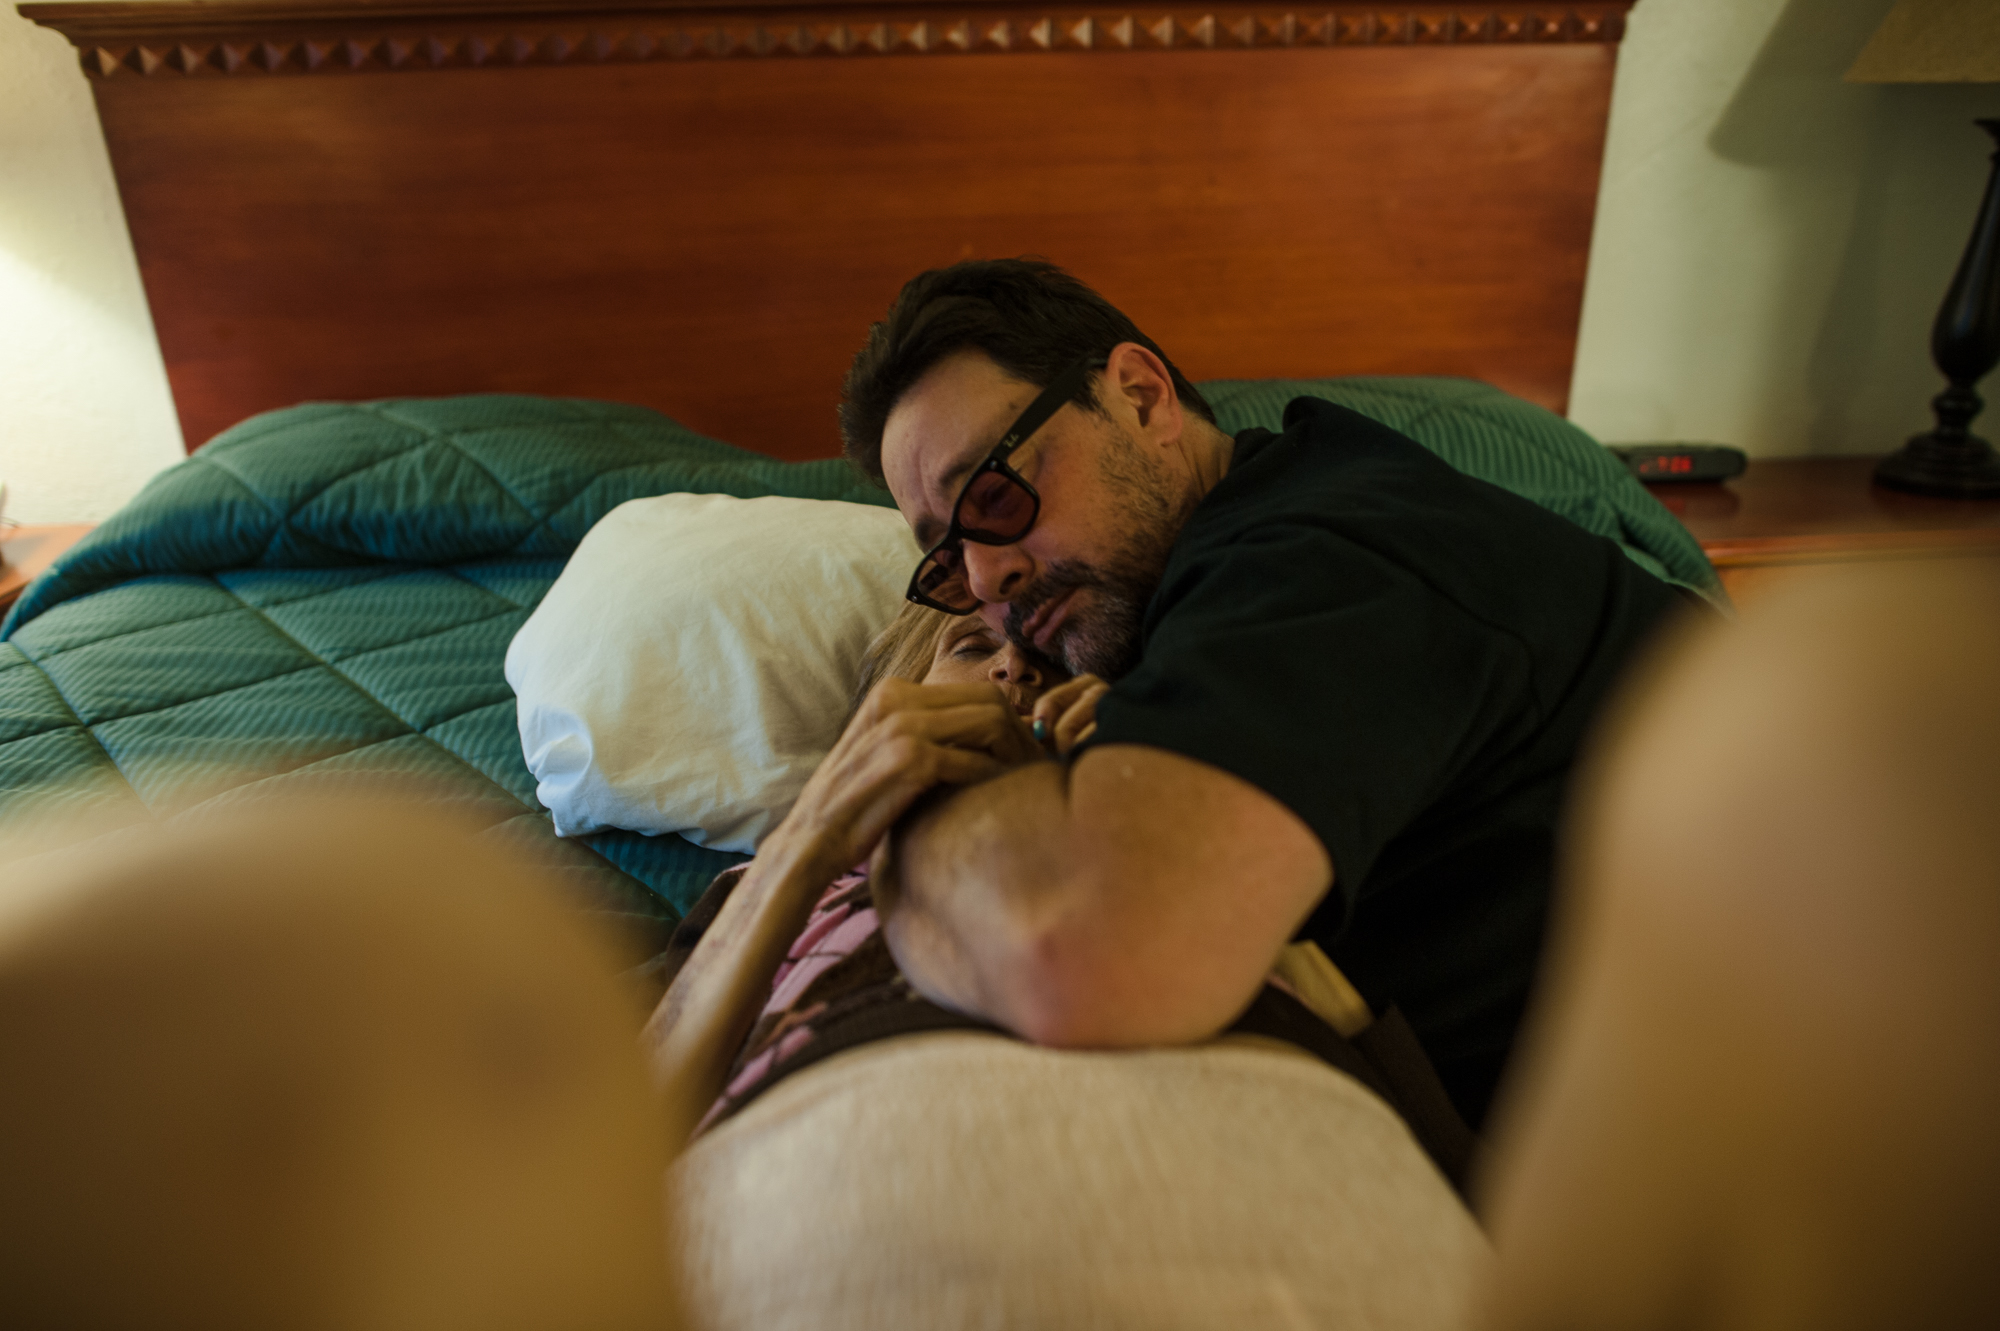  Rosie and Adam embrace on the bed at the motel where they are staying during a vacation to Palm Springs, California.  